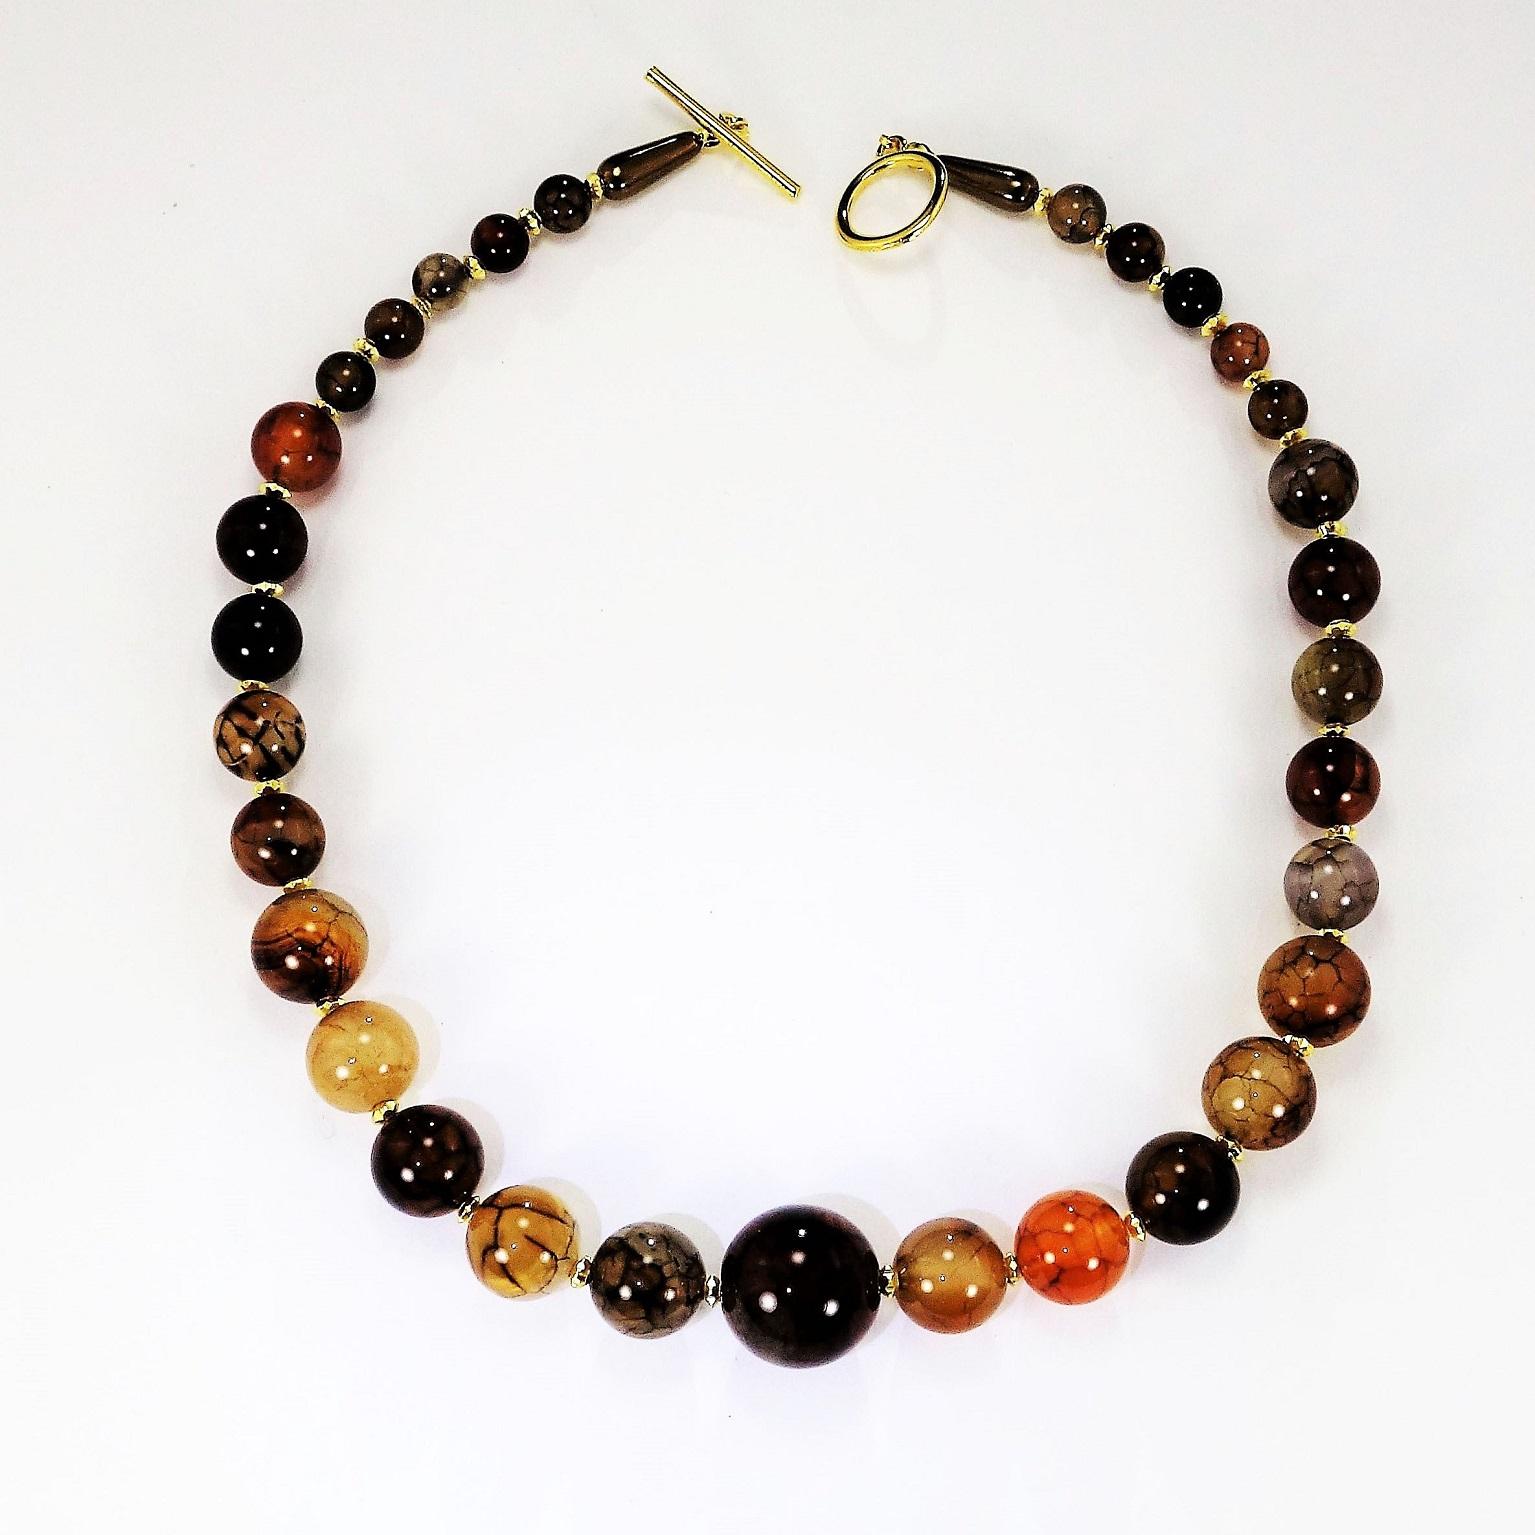 Necklace of four sizes of glowing Spider Web Jasper beads. These highly polished, gorgeous beads are in multi shades of brown, tan, rust, with black veining and each individual bead is interesting. The beads are accented with gold tone fluted